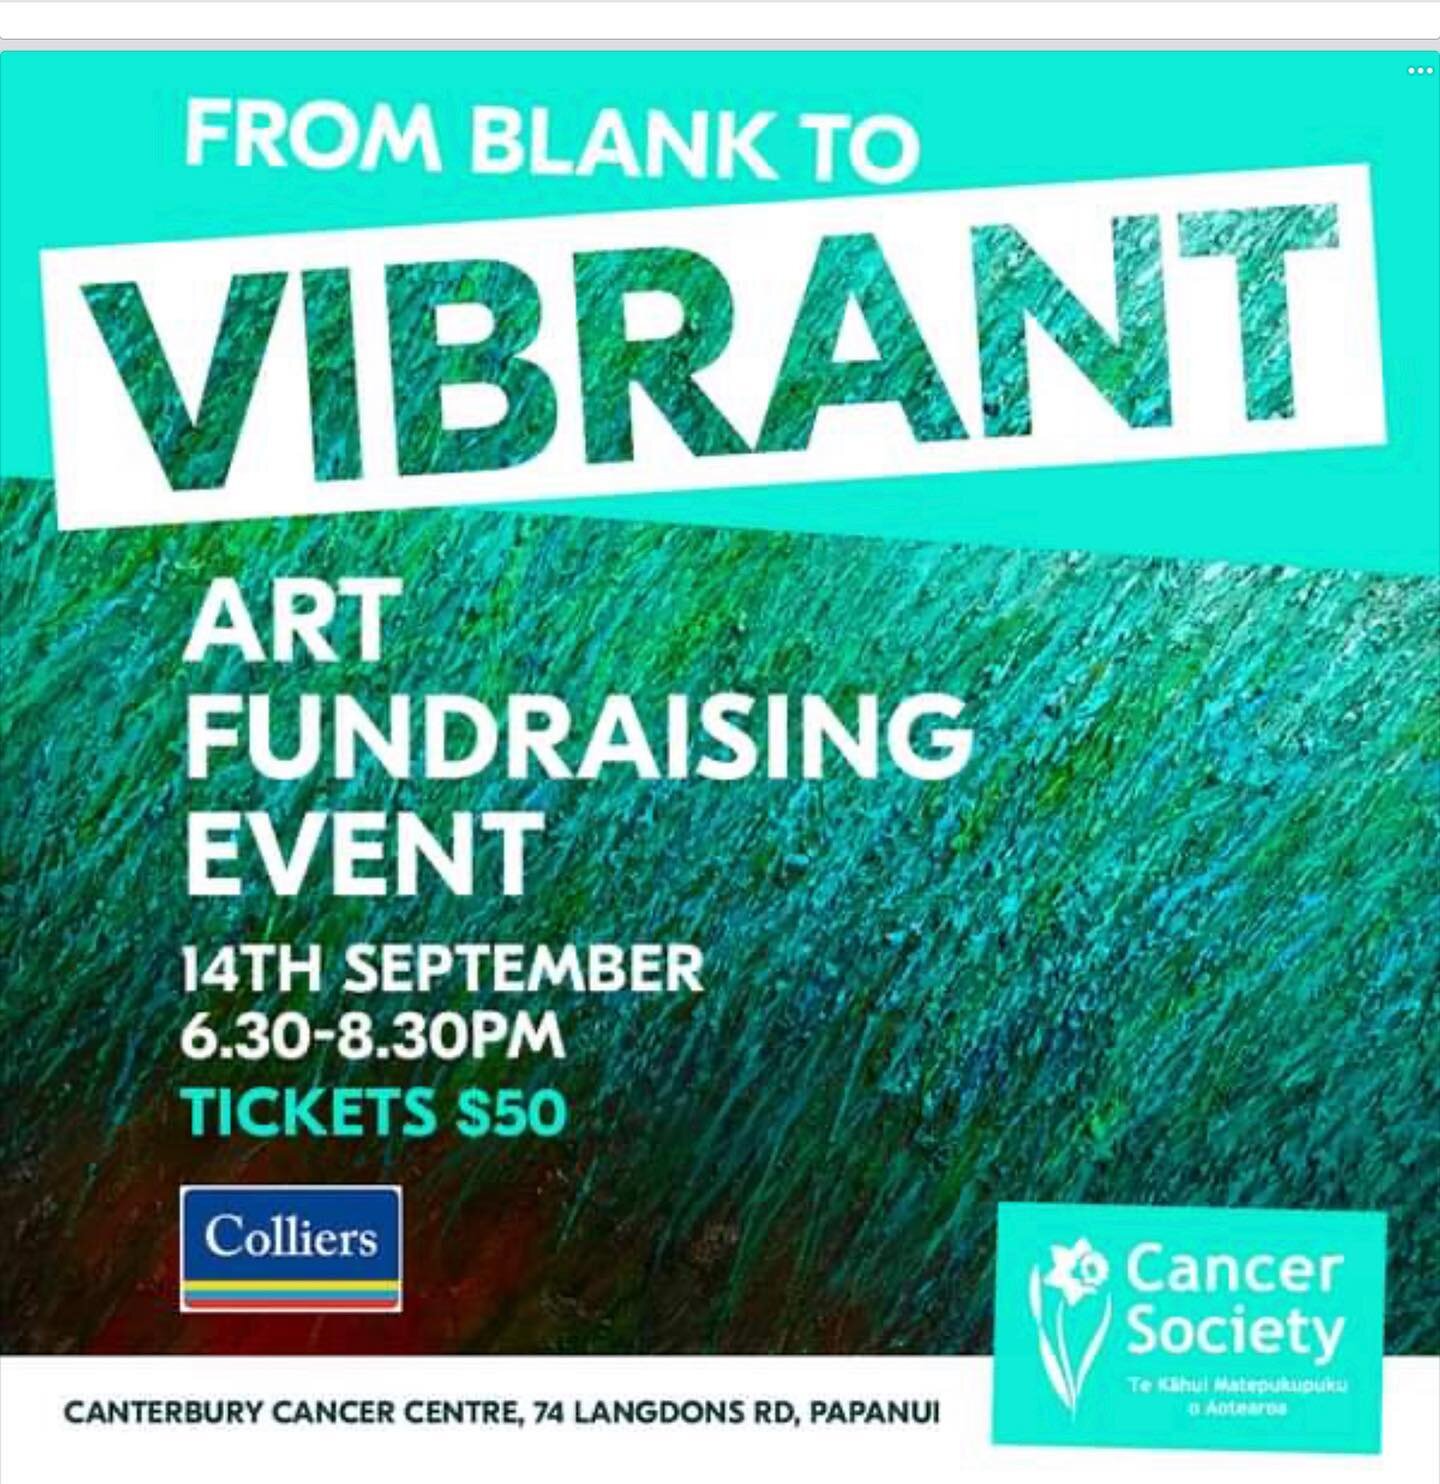 I am included Fundraising art event, from Blank to Vibrant as well 10 different artists&rsquo;s works will be featured else.  Come and support. 

https://m.facebook.com/story.php?story_fbid=pfbid0KCWpdMpsYWJiWaGBfthbjcQmwMKq26JG6KmWX6yTrWxz1UWkQgpv4h